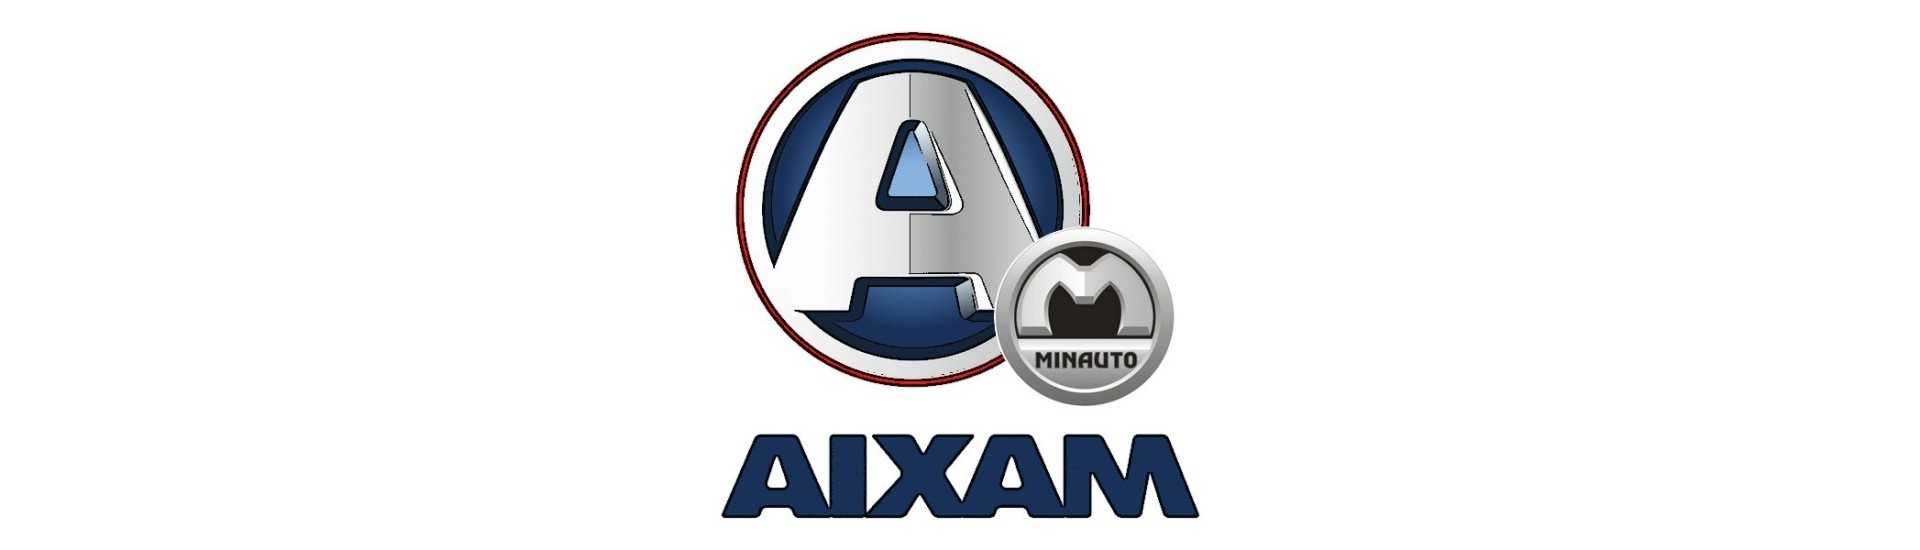 Best price counter for car without a permit Aixam Minauto